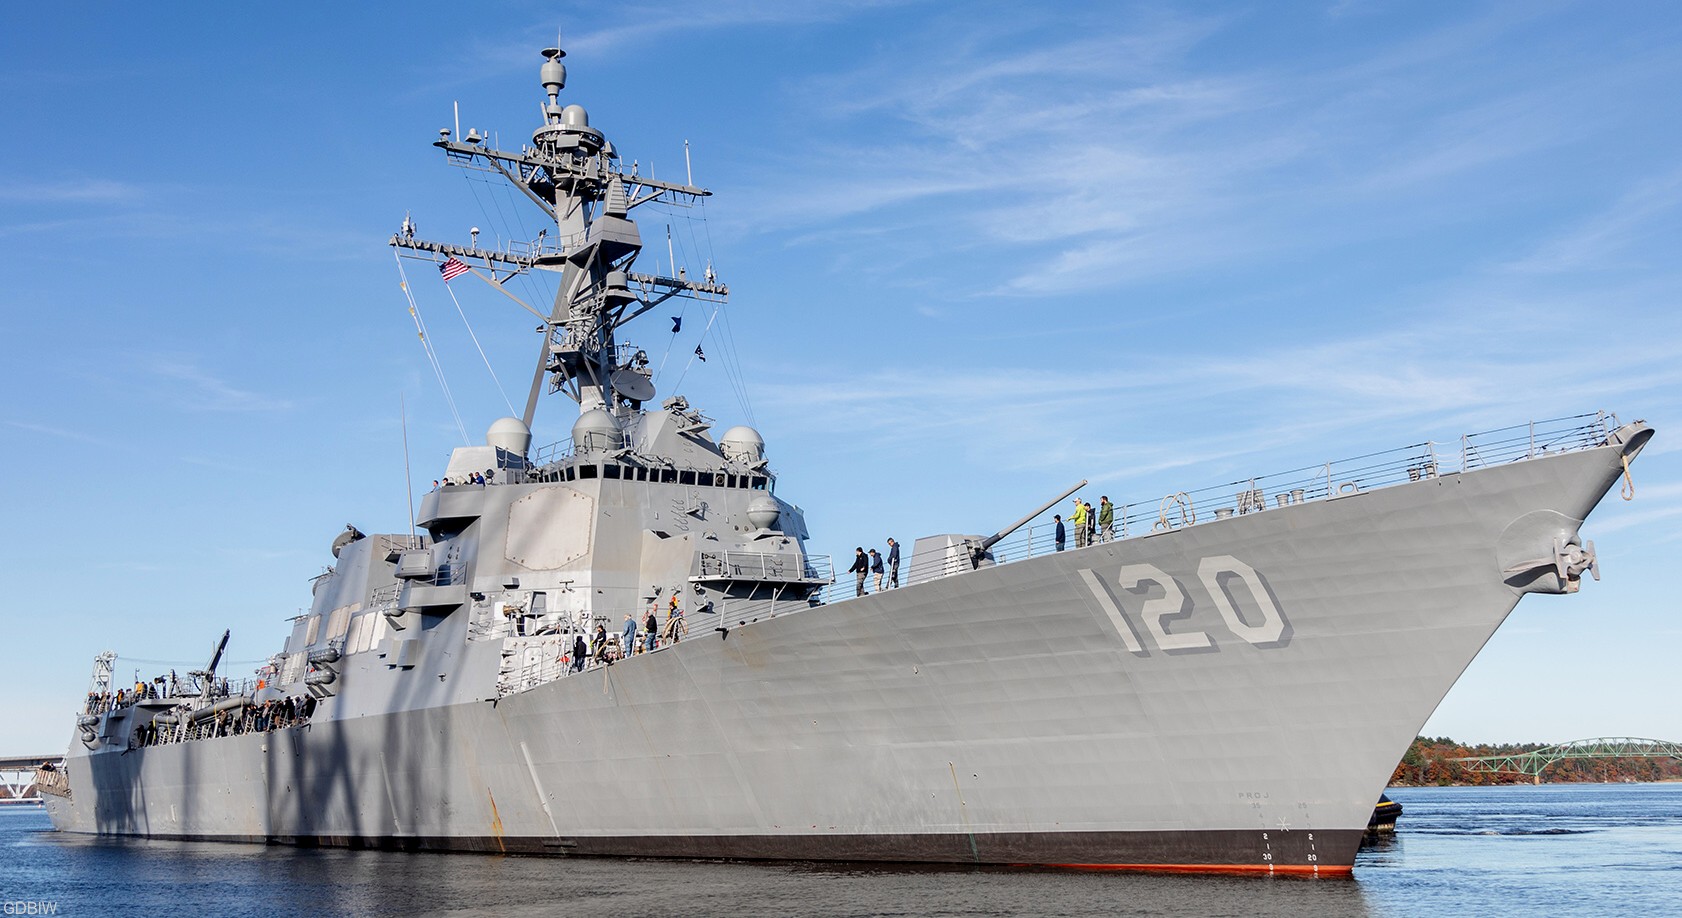 ddg-120 uss carl m. levin arleigh burke class guided missile destroyer aegis us navy 24